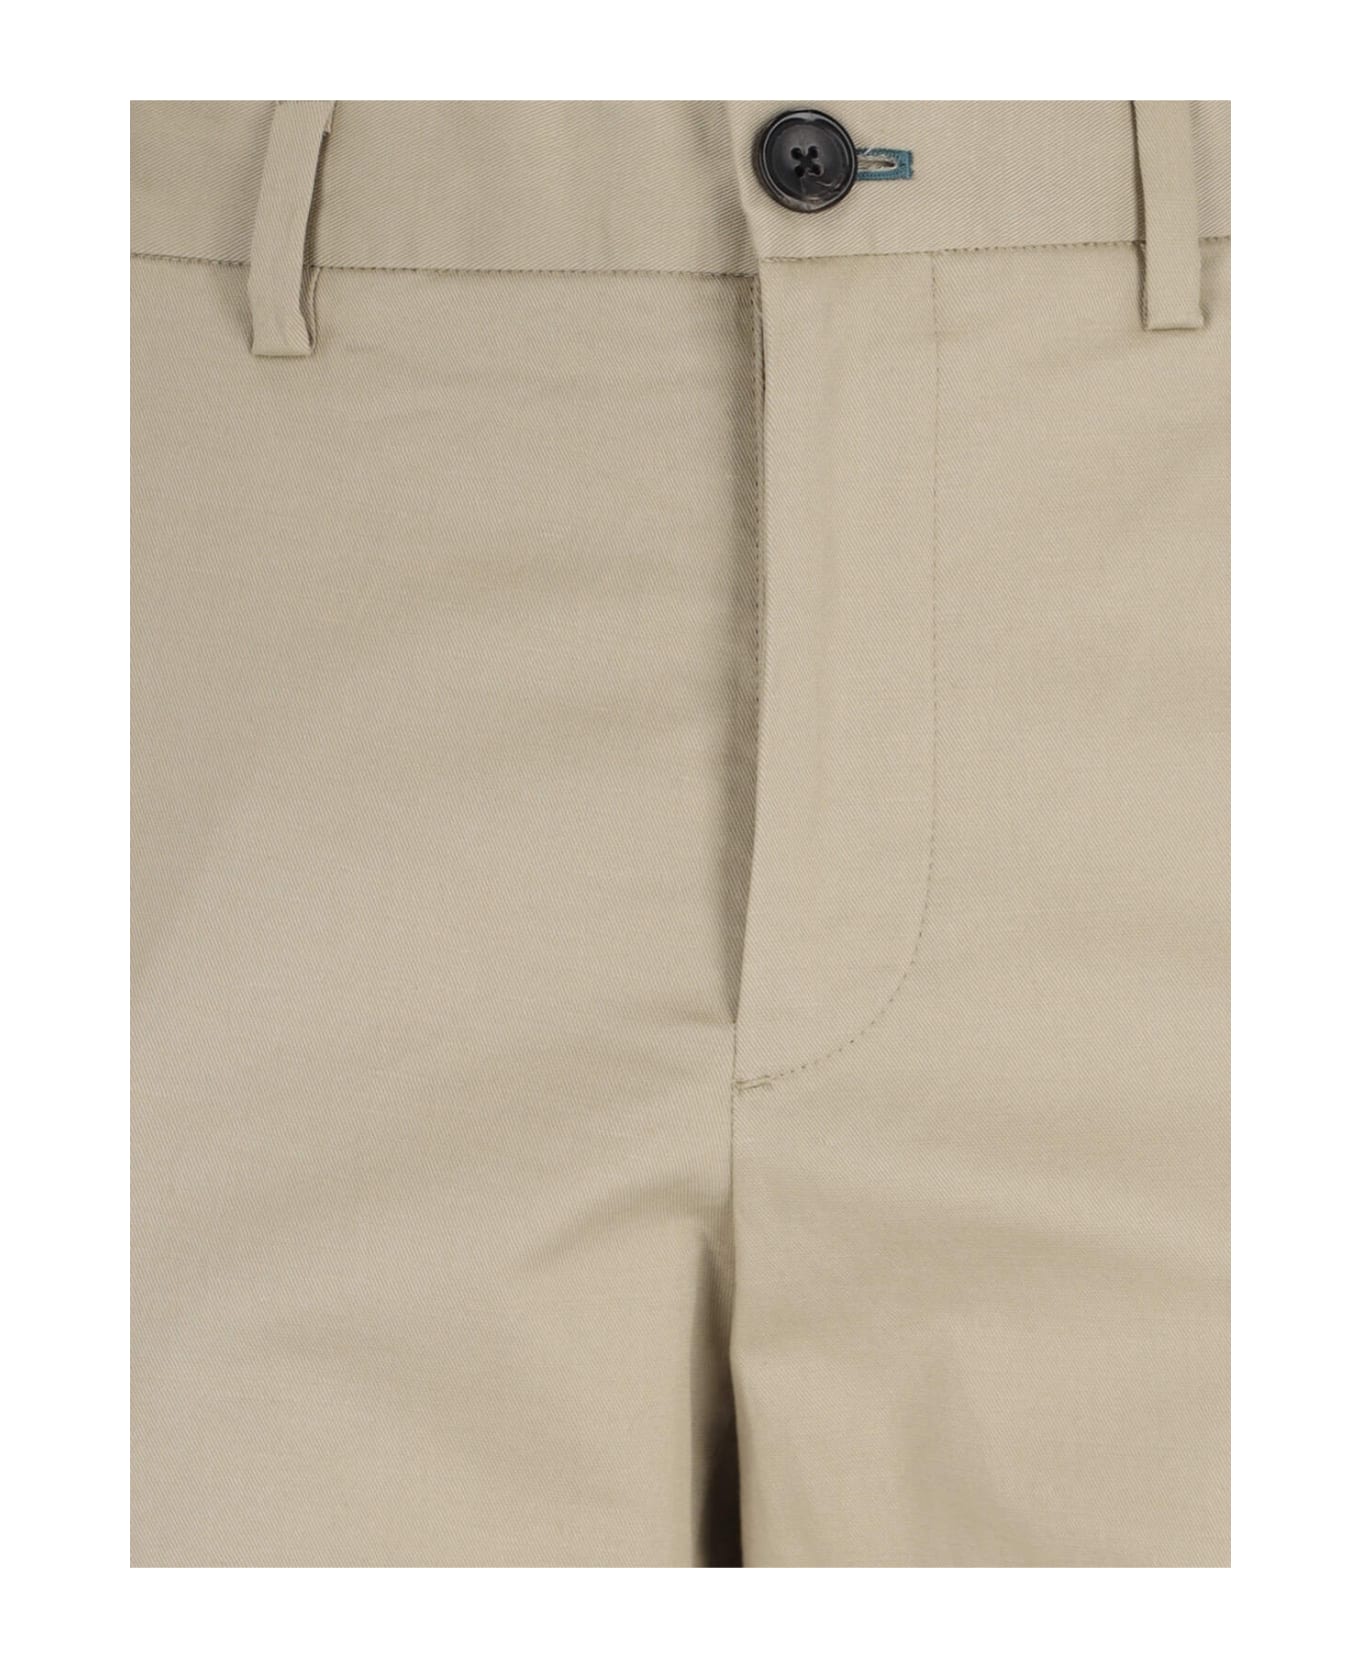 Paul Smith Chinos - Beige